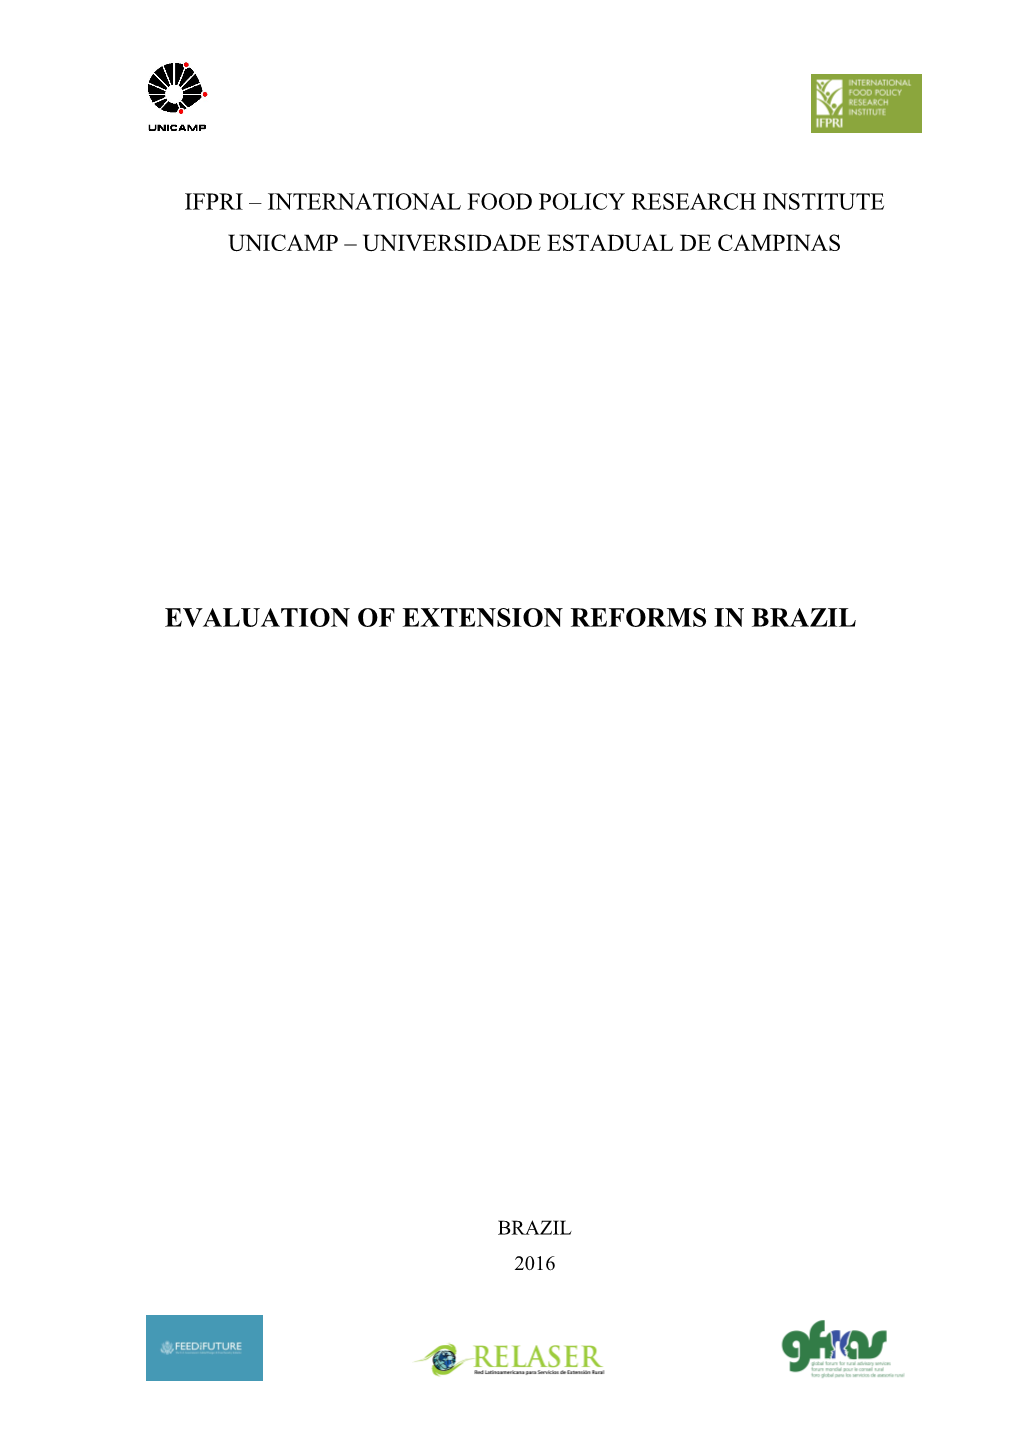 Evaluation of Extension Reforms in Brazil